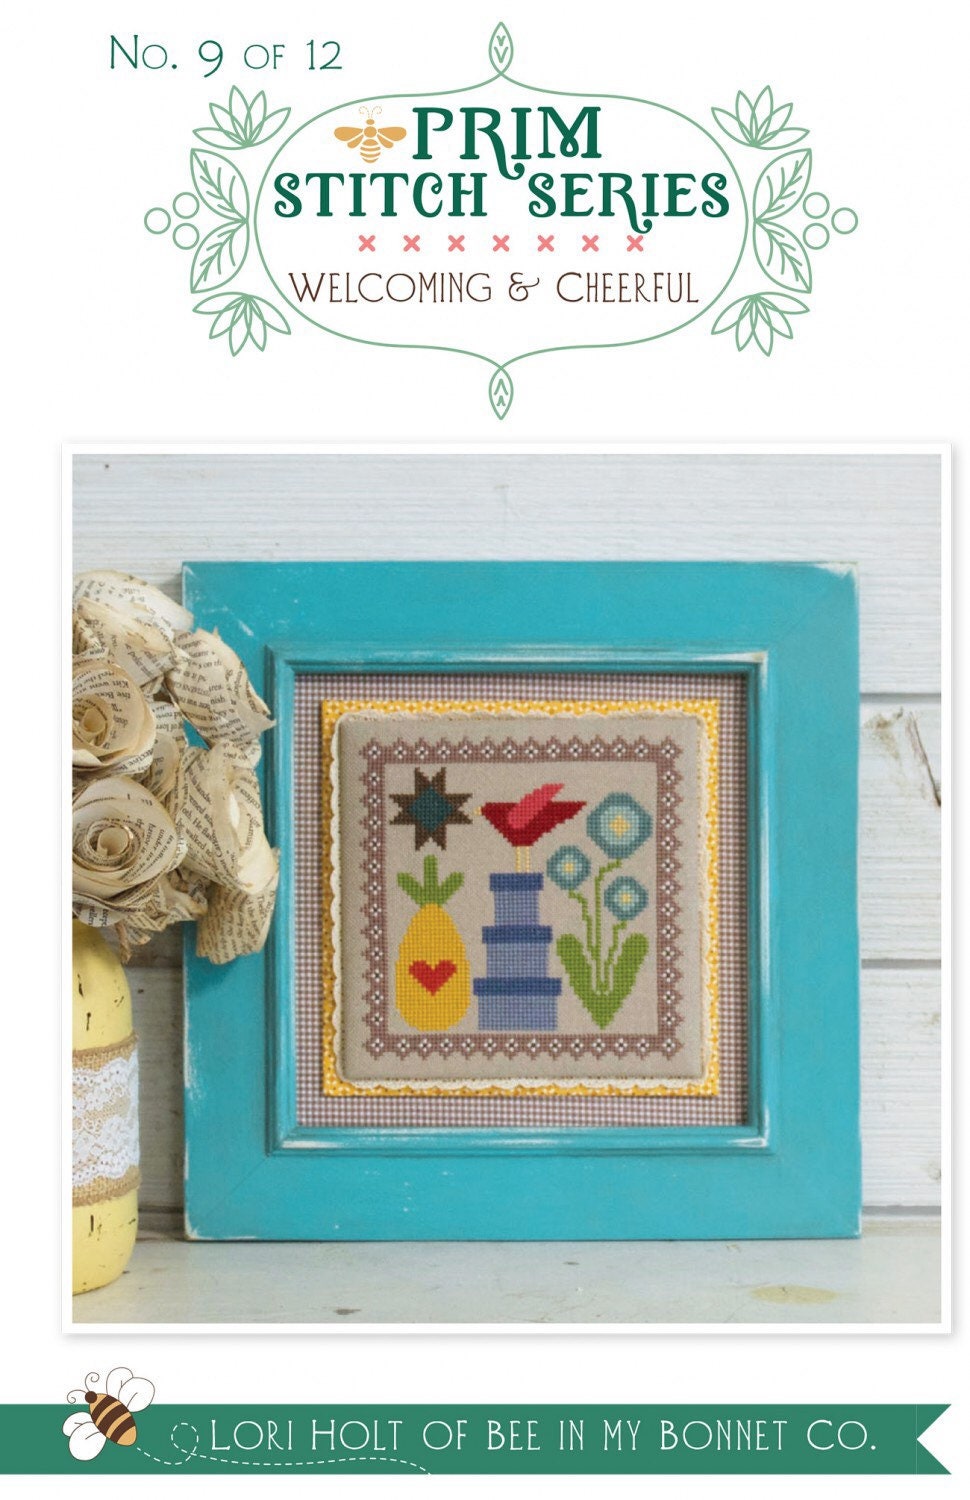 Prim Stitch Series #9 - Welcoming and Cheerful - Cross Stitch Pattern - Lori Holt - Bee In My Bonnet - It’s Sew Emma